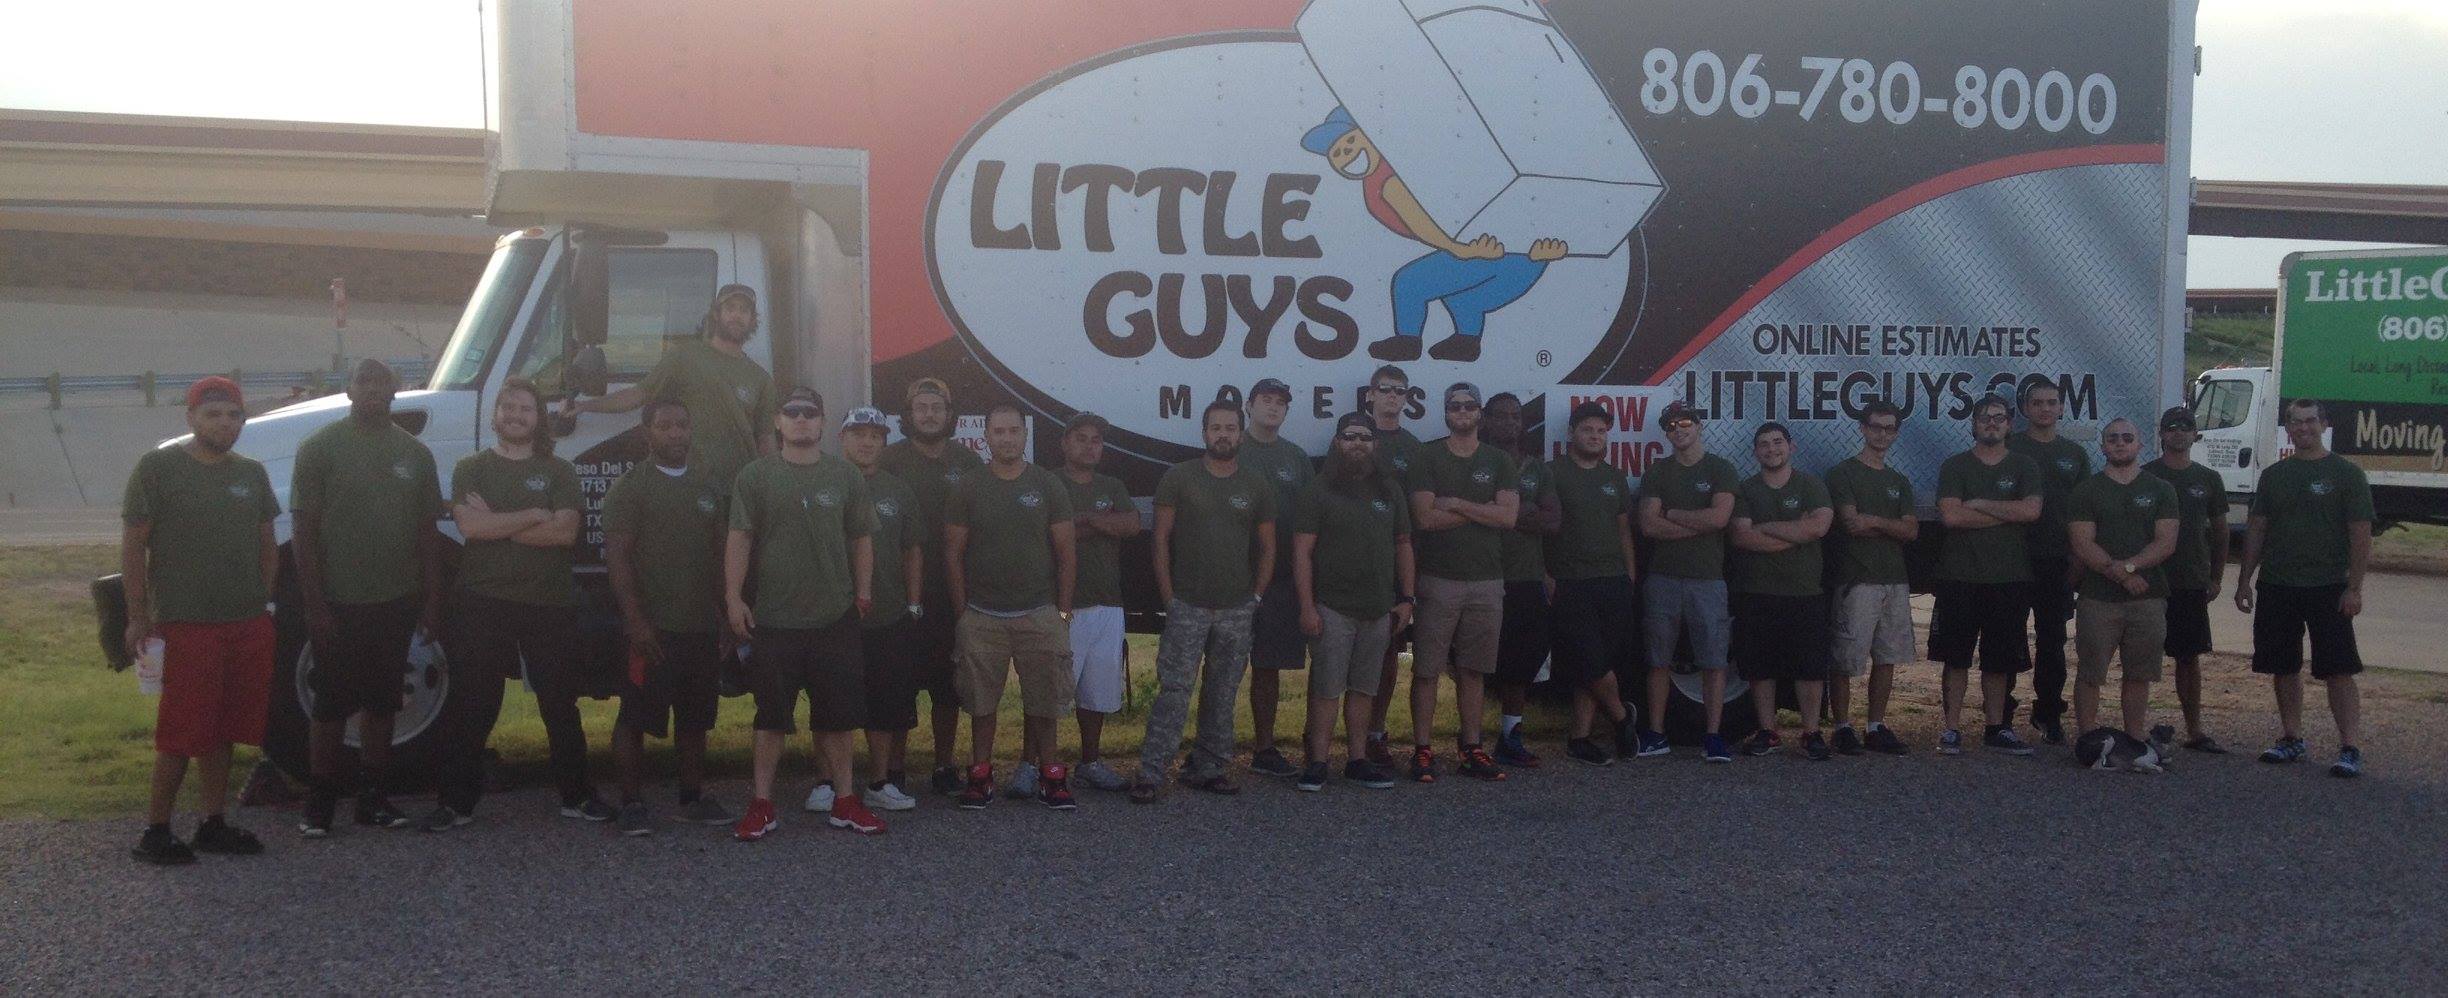 Lubbock Little Guys in front of moving truck